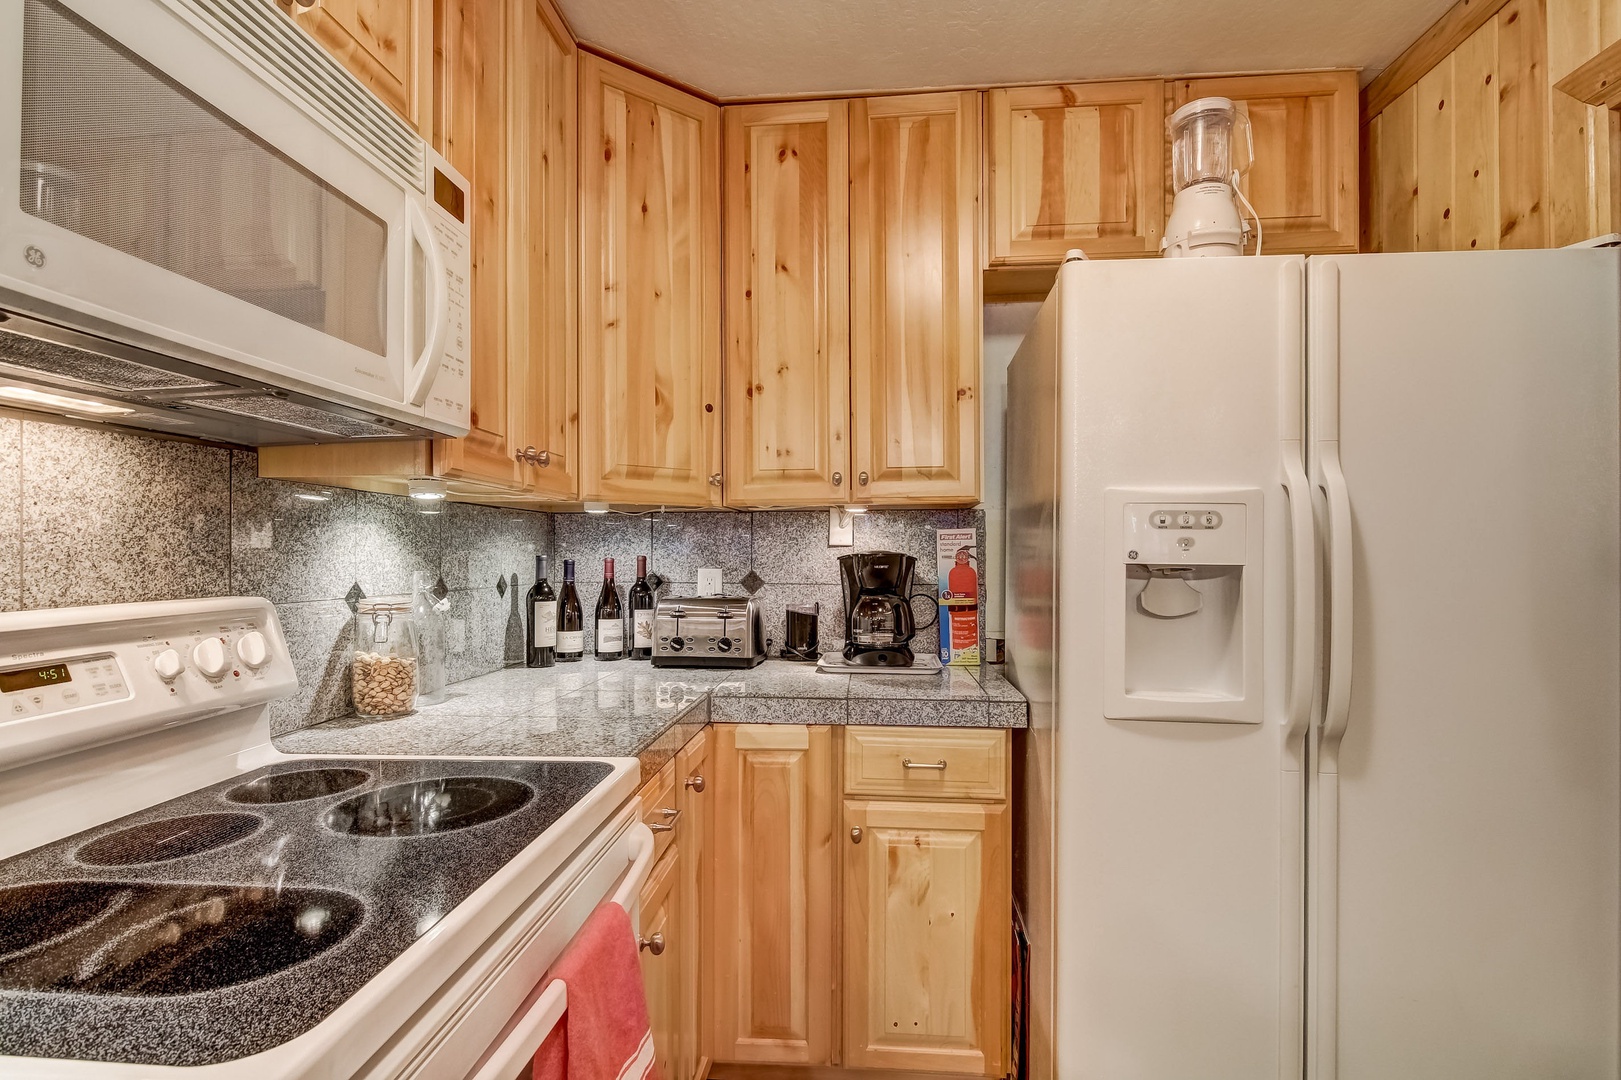 Full kitchen w/ toaster, drip coffee, blender, slow cooker, and more!